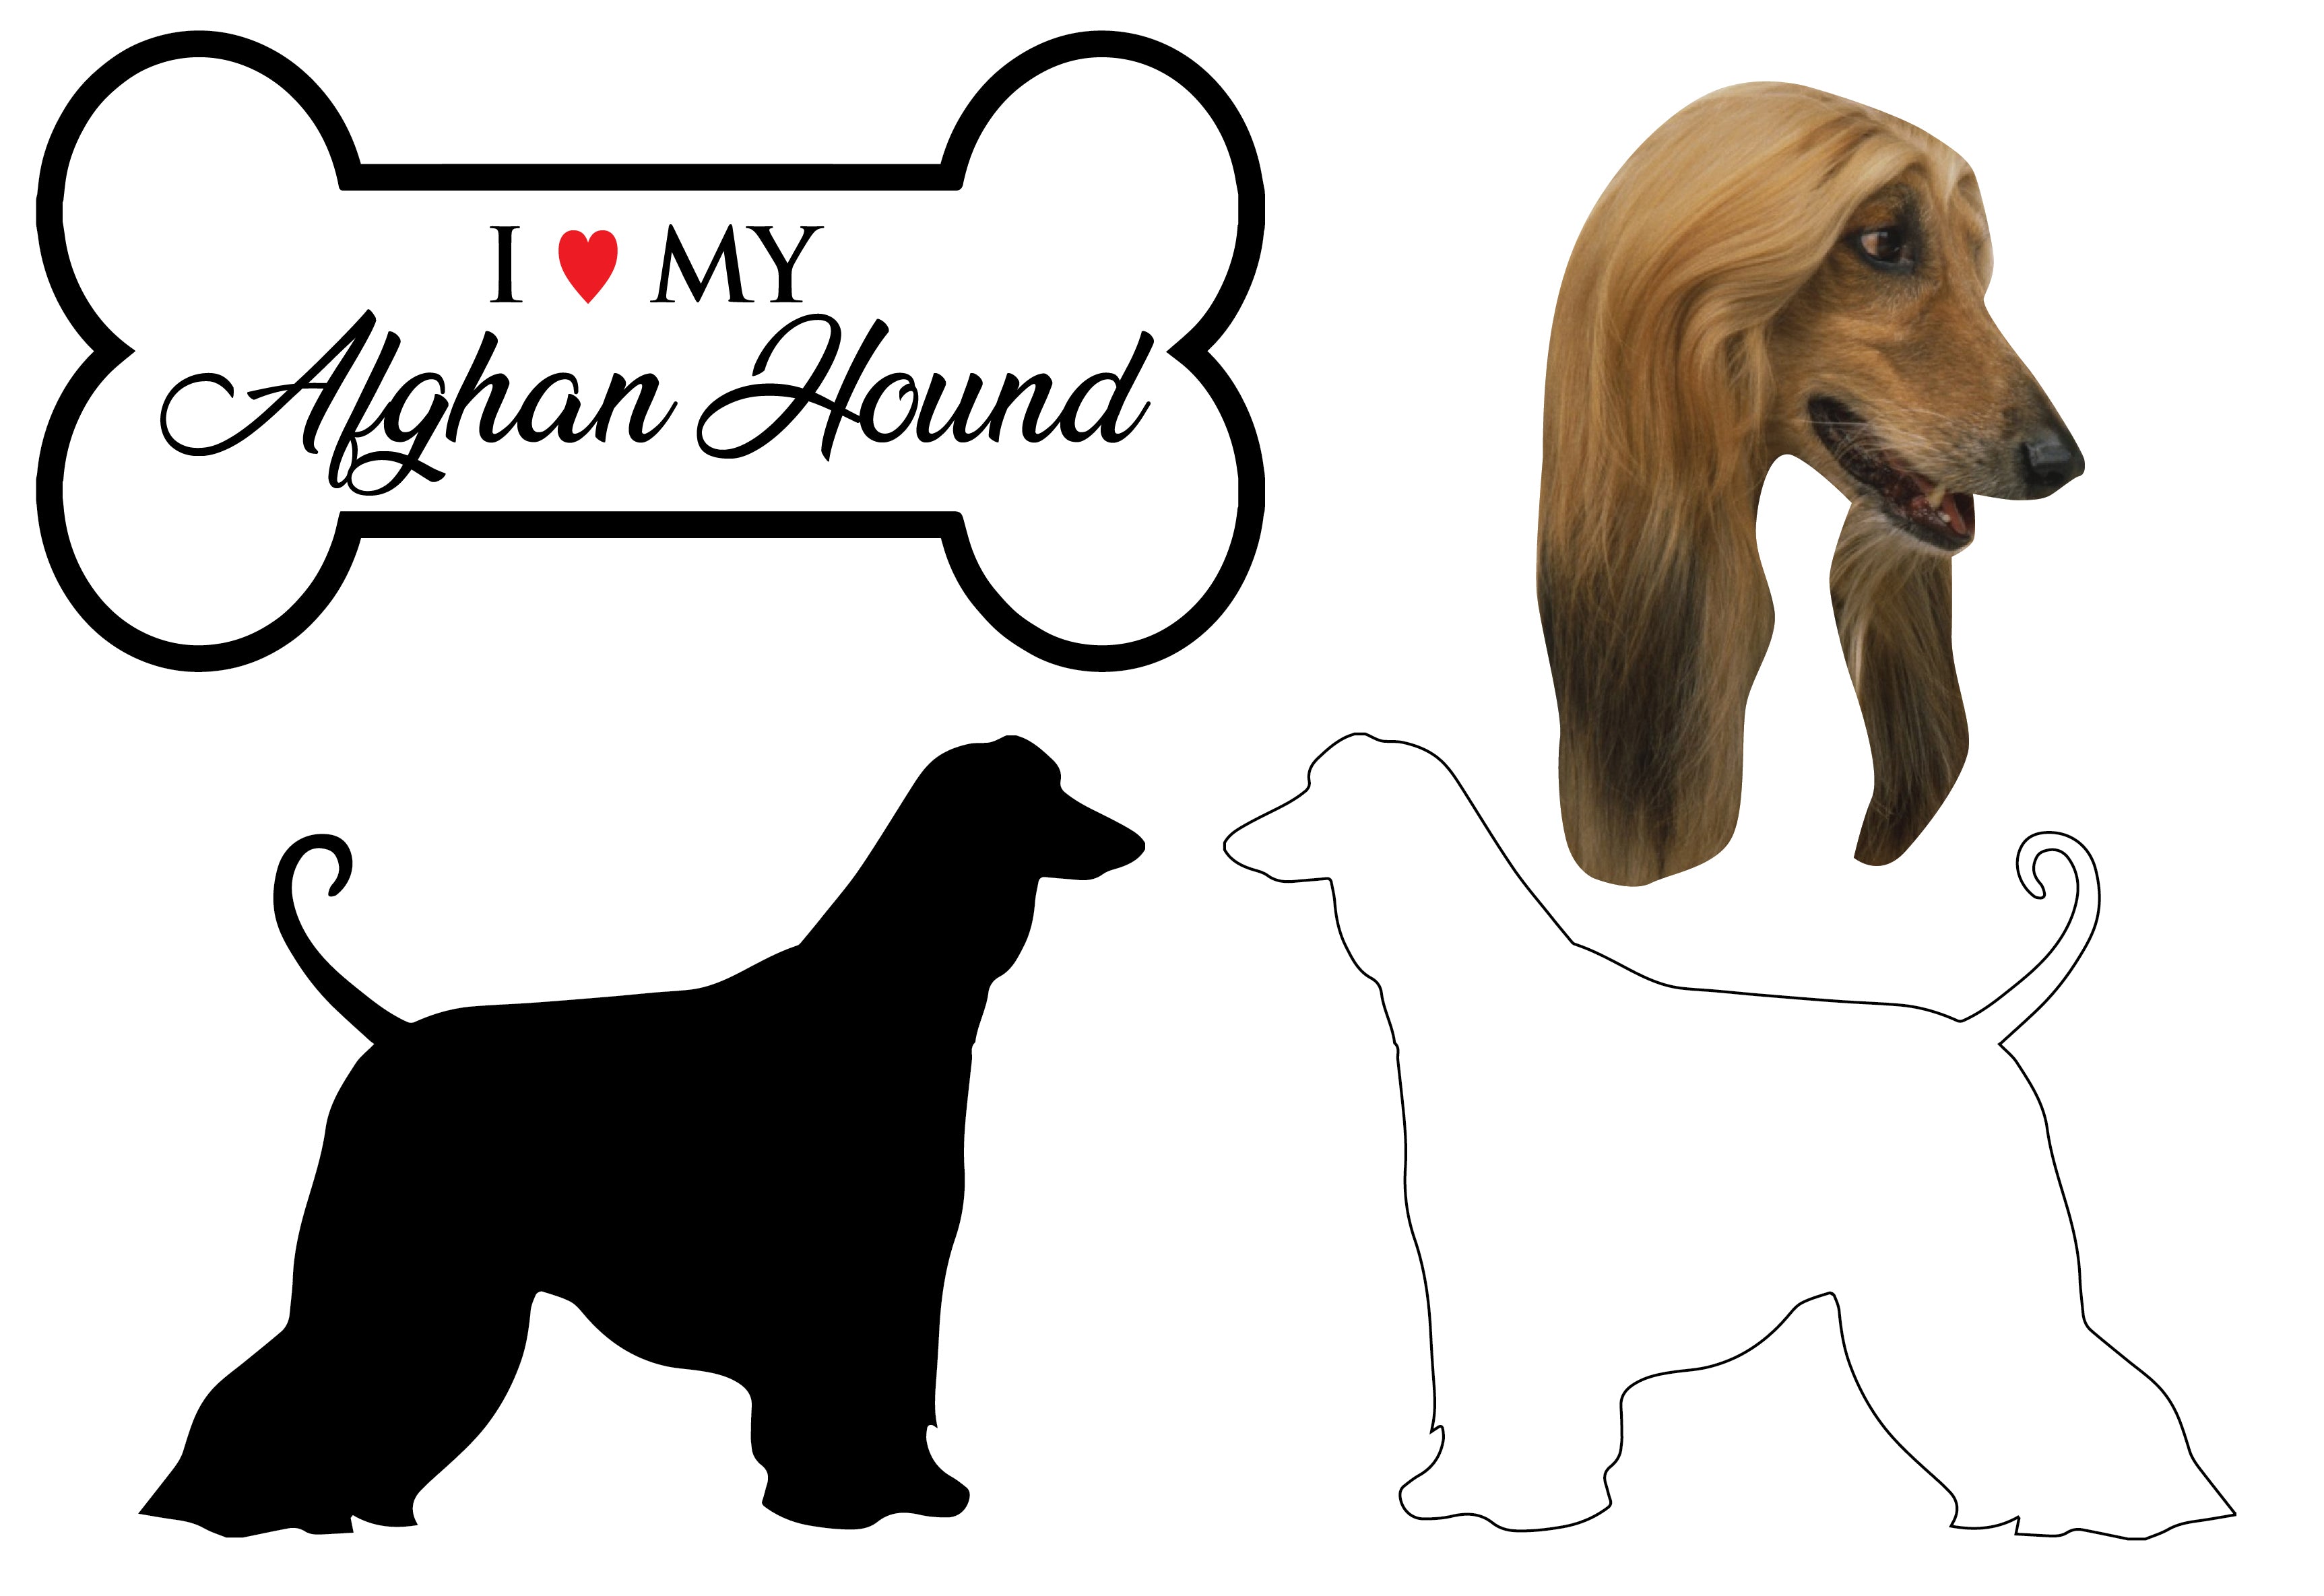 Afghan Hound - Dog Breed Decals (Set of 16) - Sizes in Description